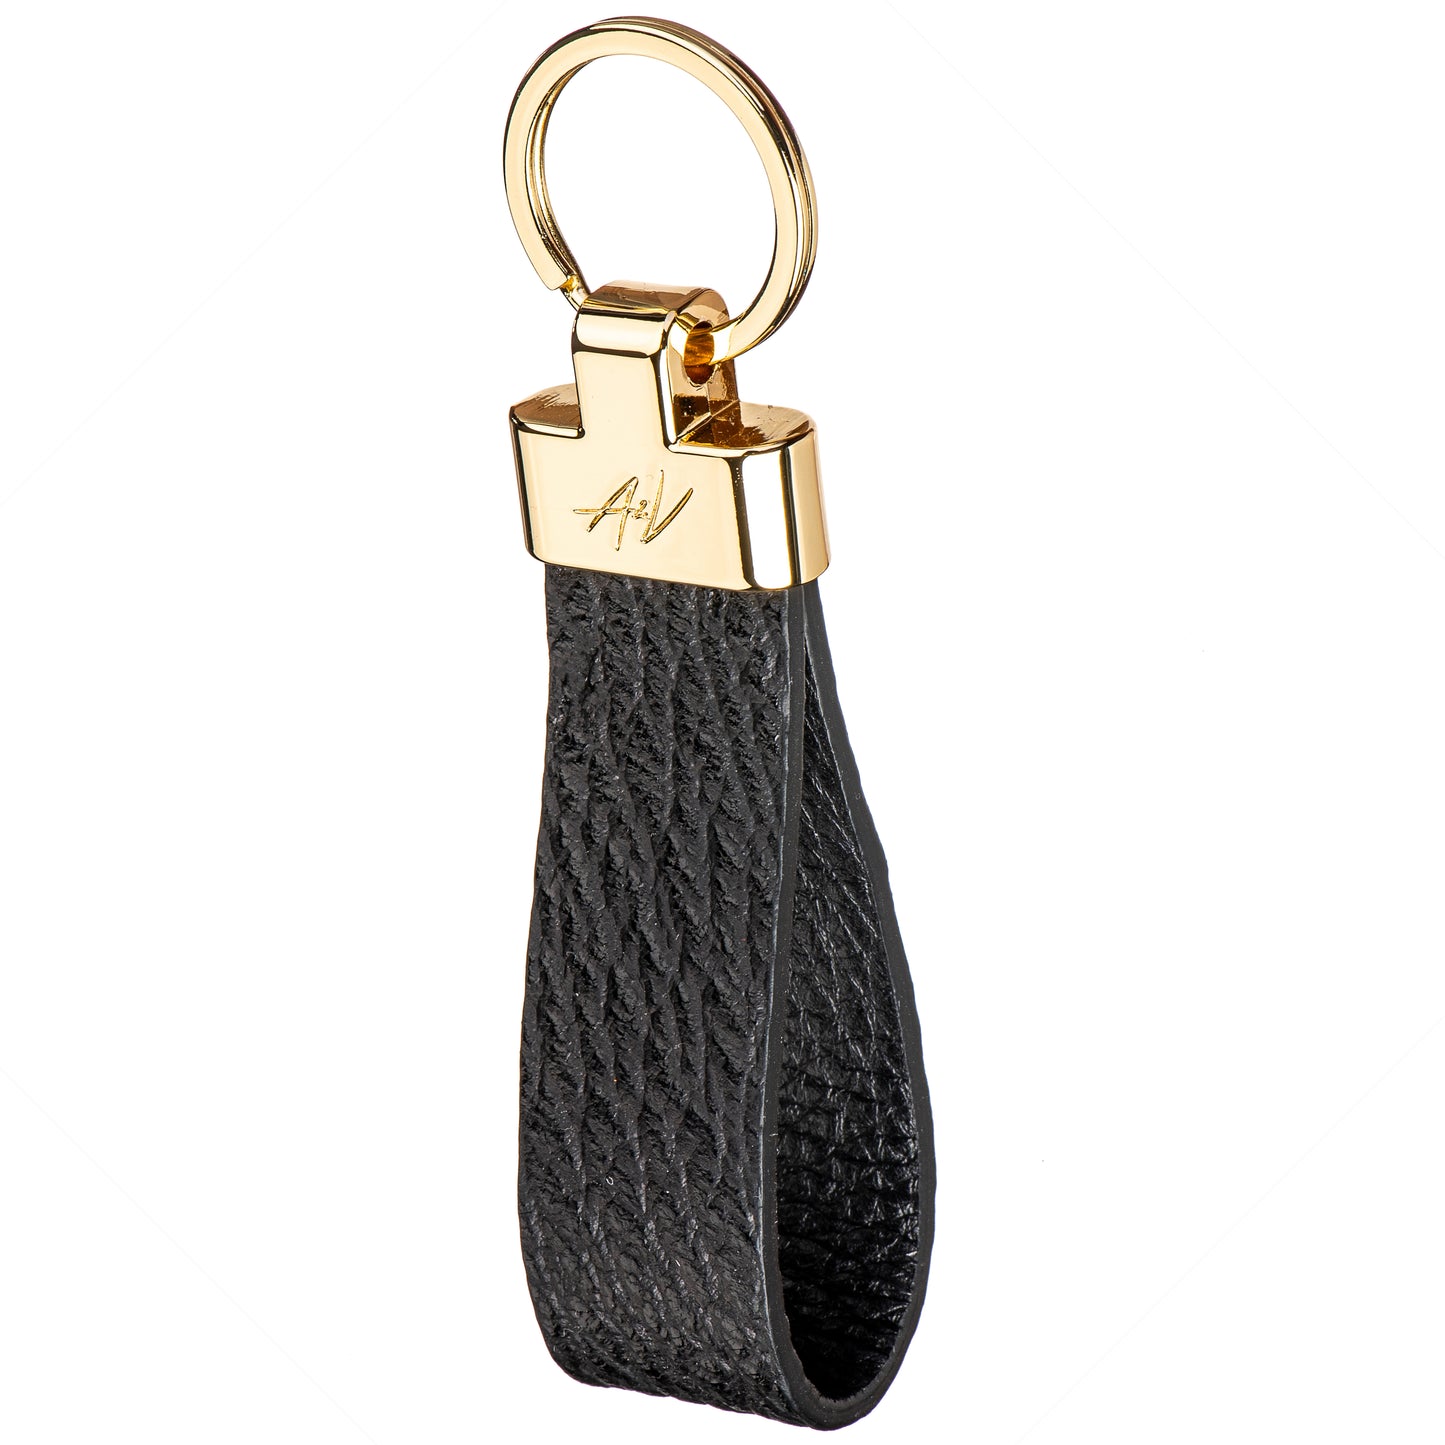 KEYCHAIN ROUNDED OLD BLACK